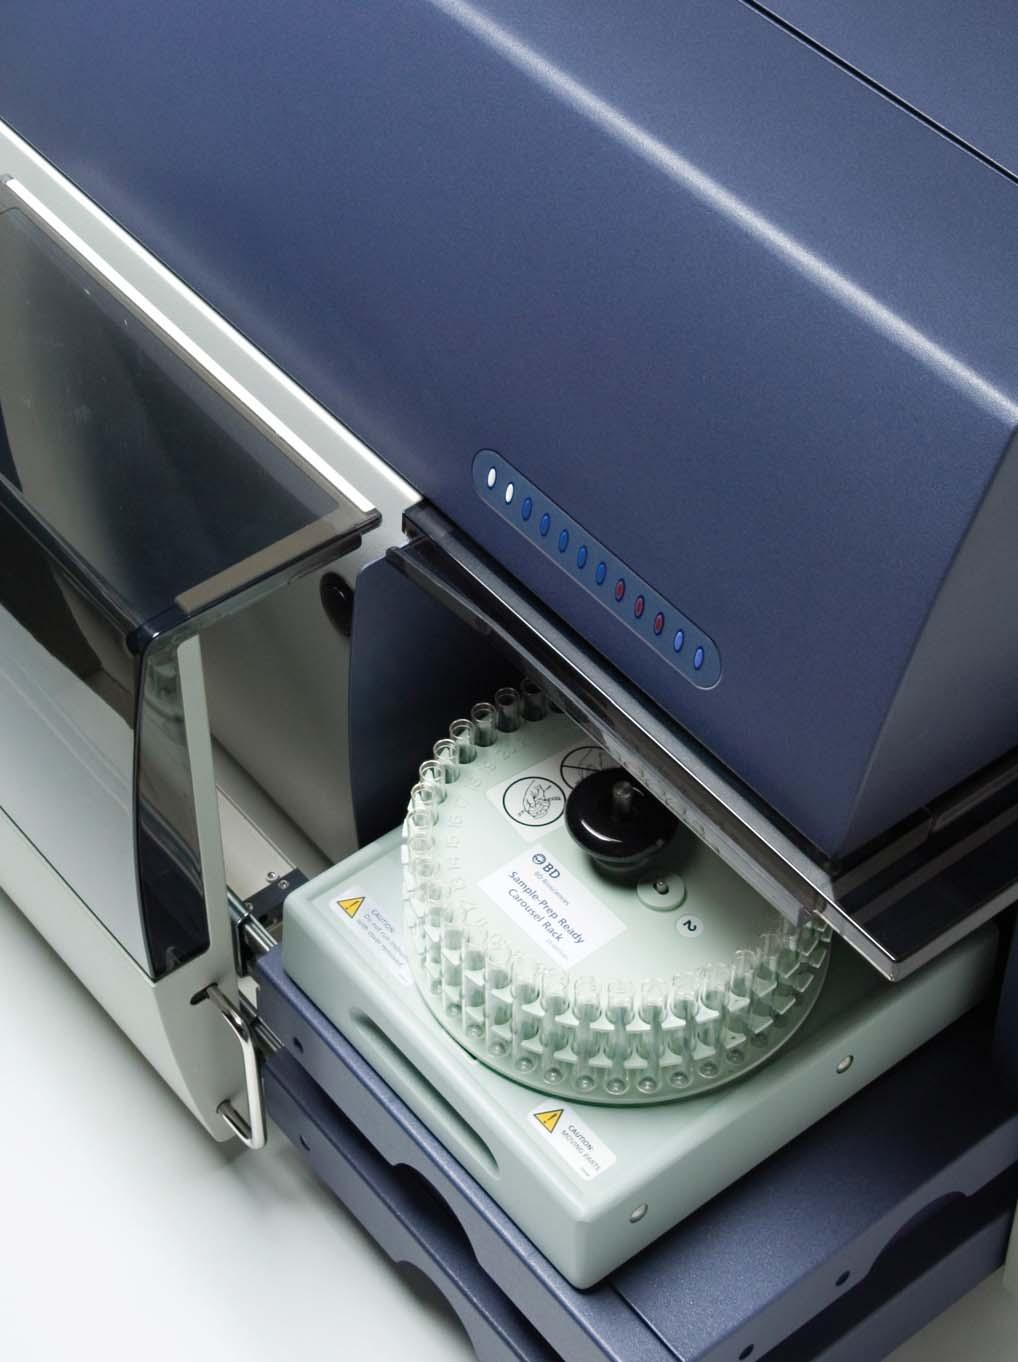 To maximize workflow, this system automates and reduces routine tasks, offers solutions for sample preparation, and provides more answers per test than ever before.